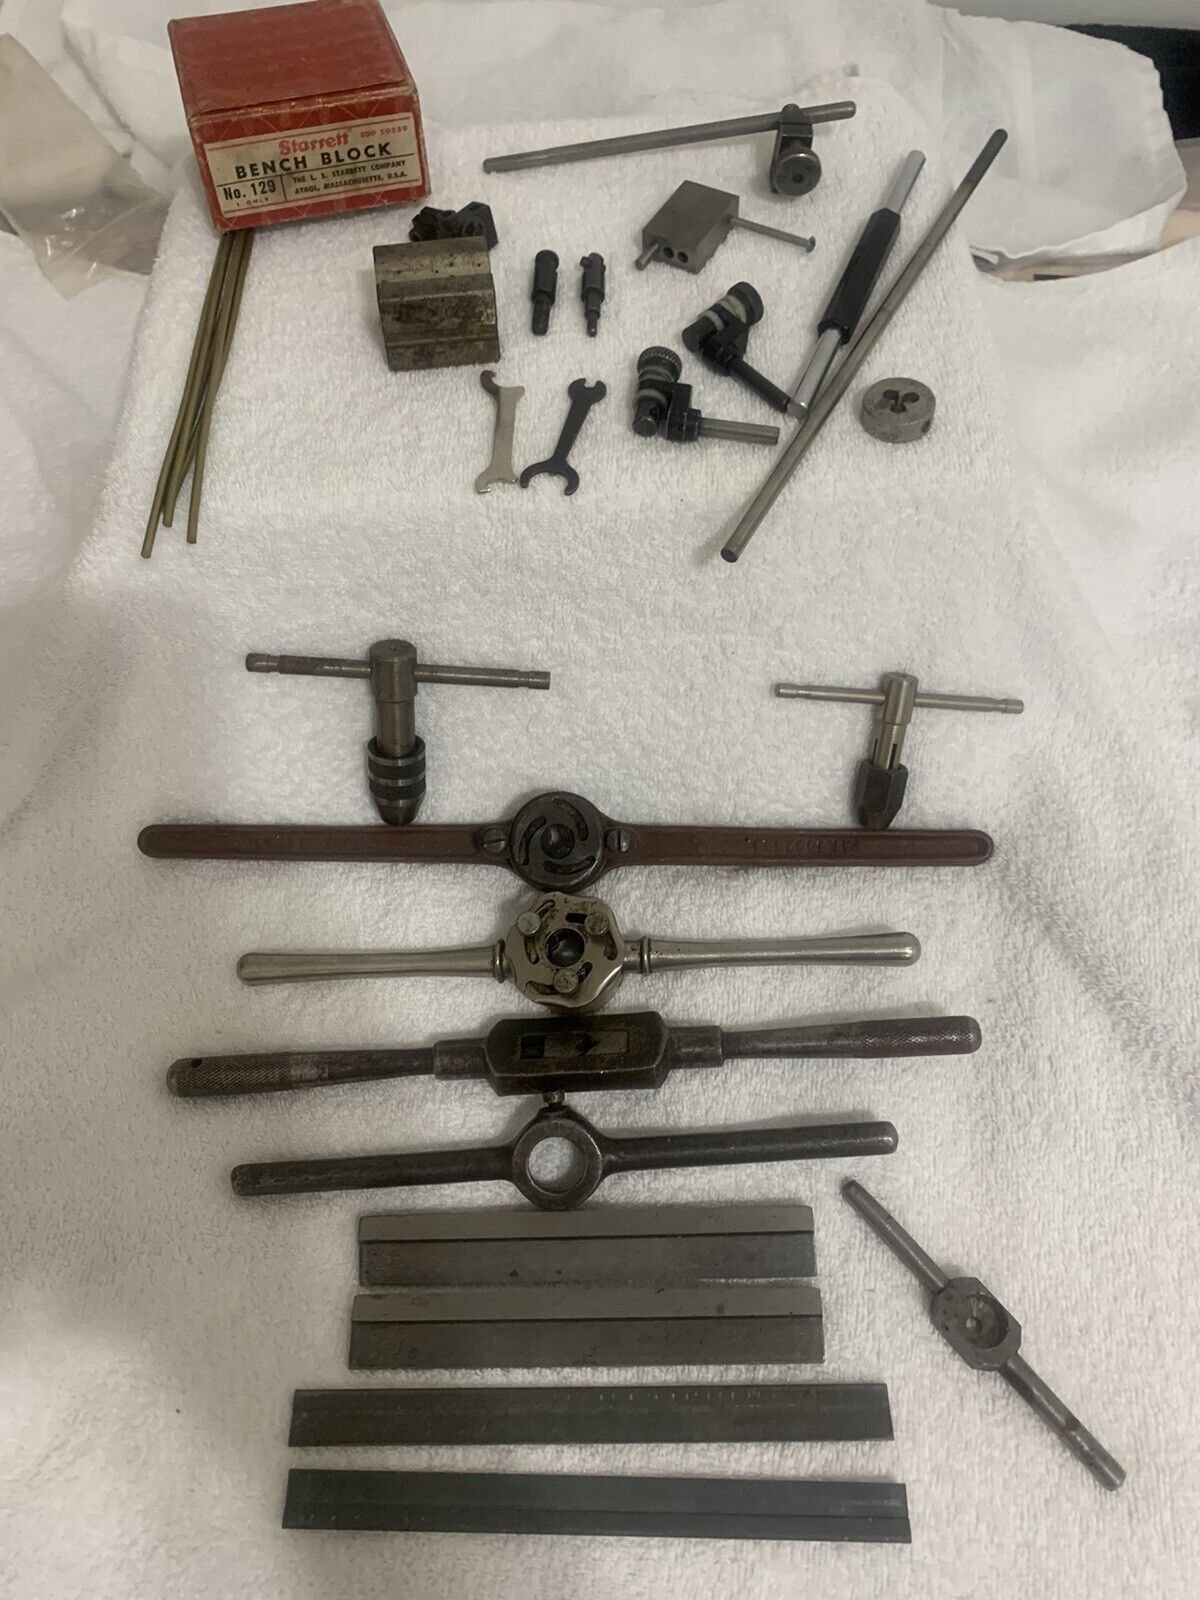 VTG. ASSORTED MACHINIST TOOL & PARTS LOT, PLEASE VIEW PHOTOS AS TO WHAT'S IN IT